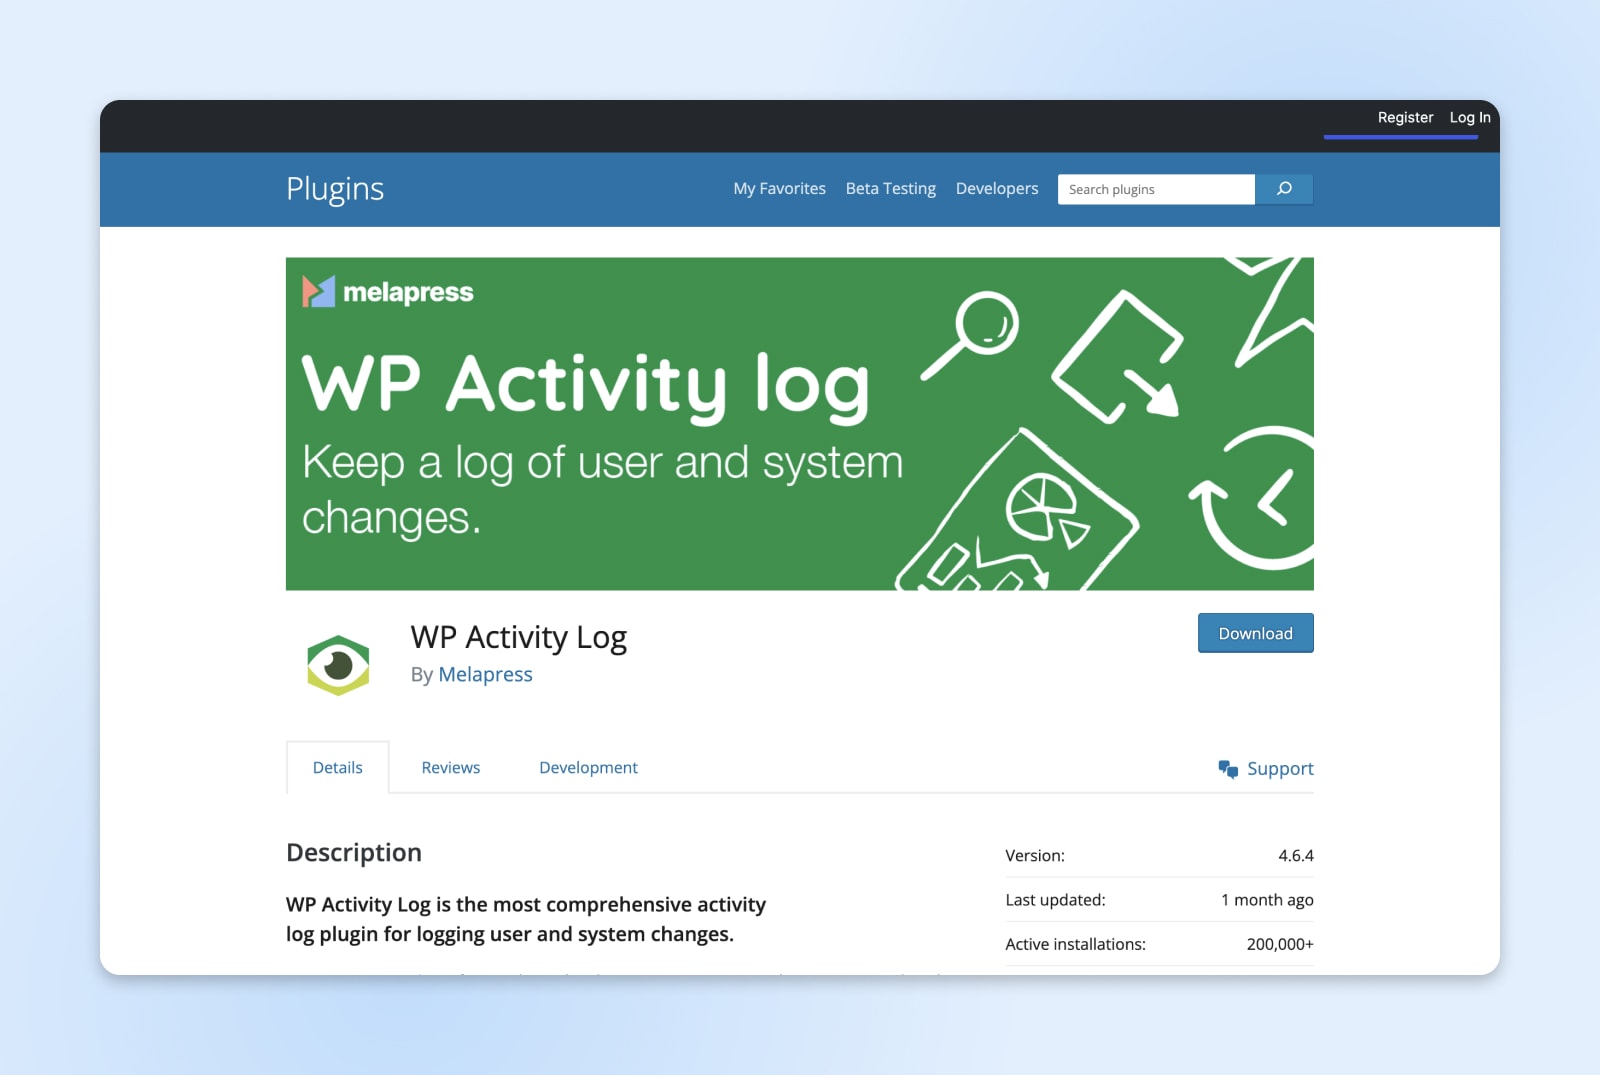 The WP Activity log plug-in screen shows a green banner and a blue download button